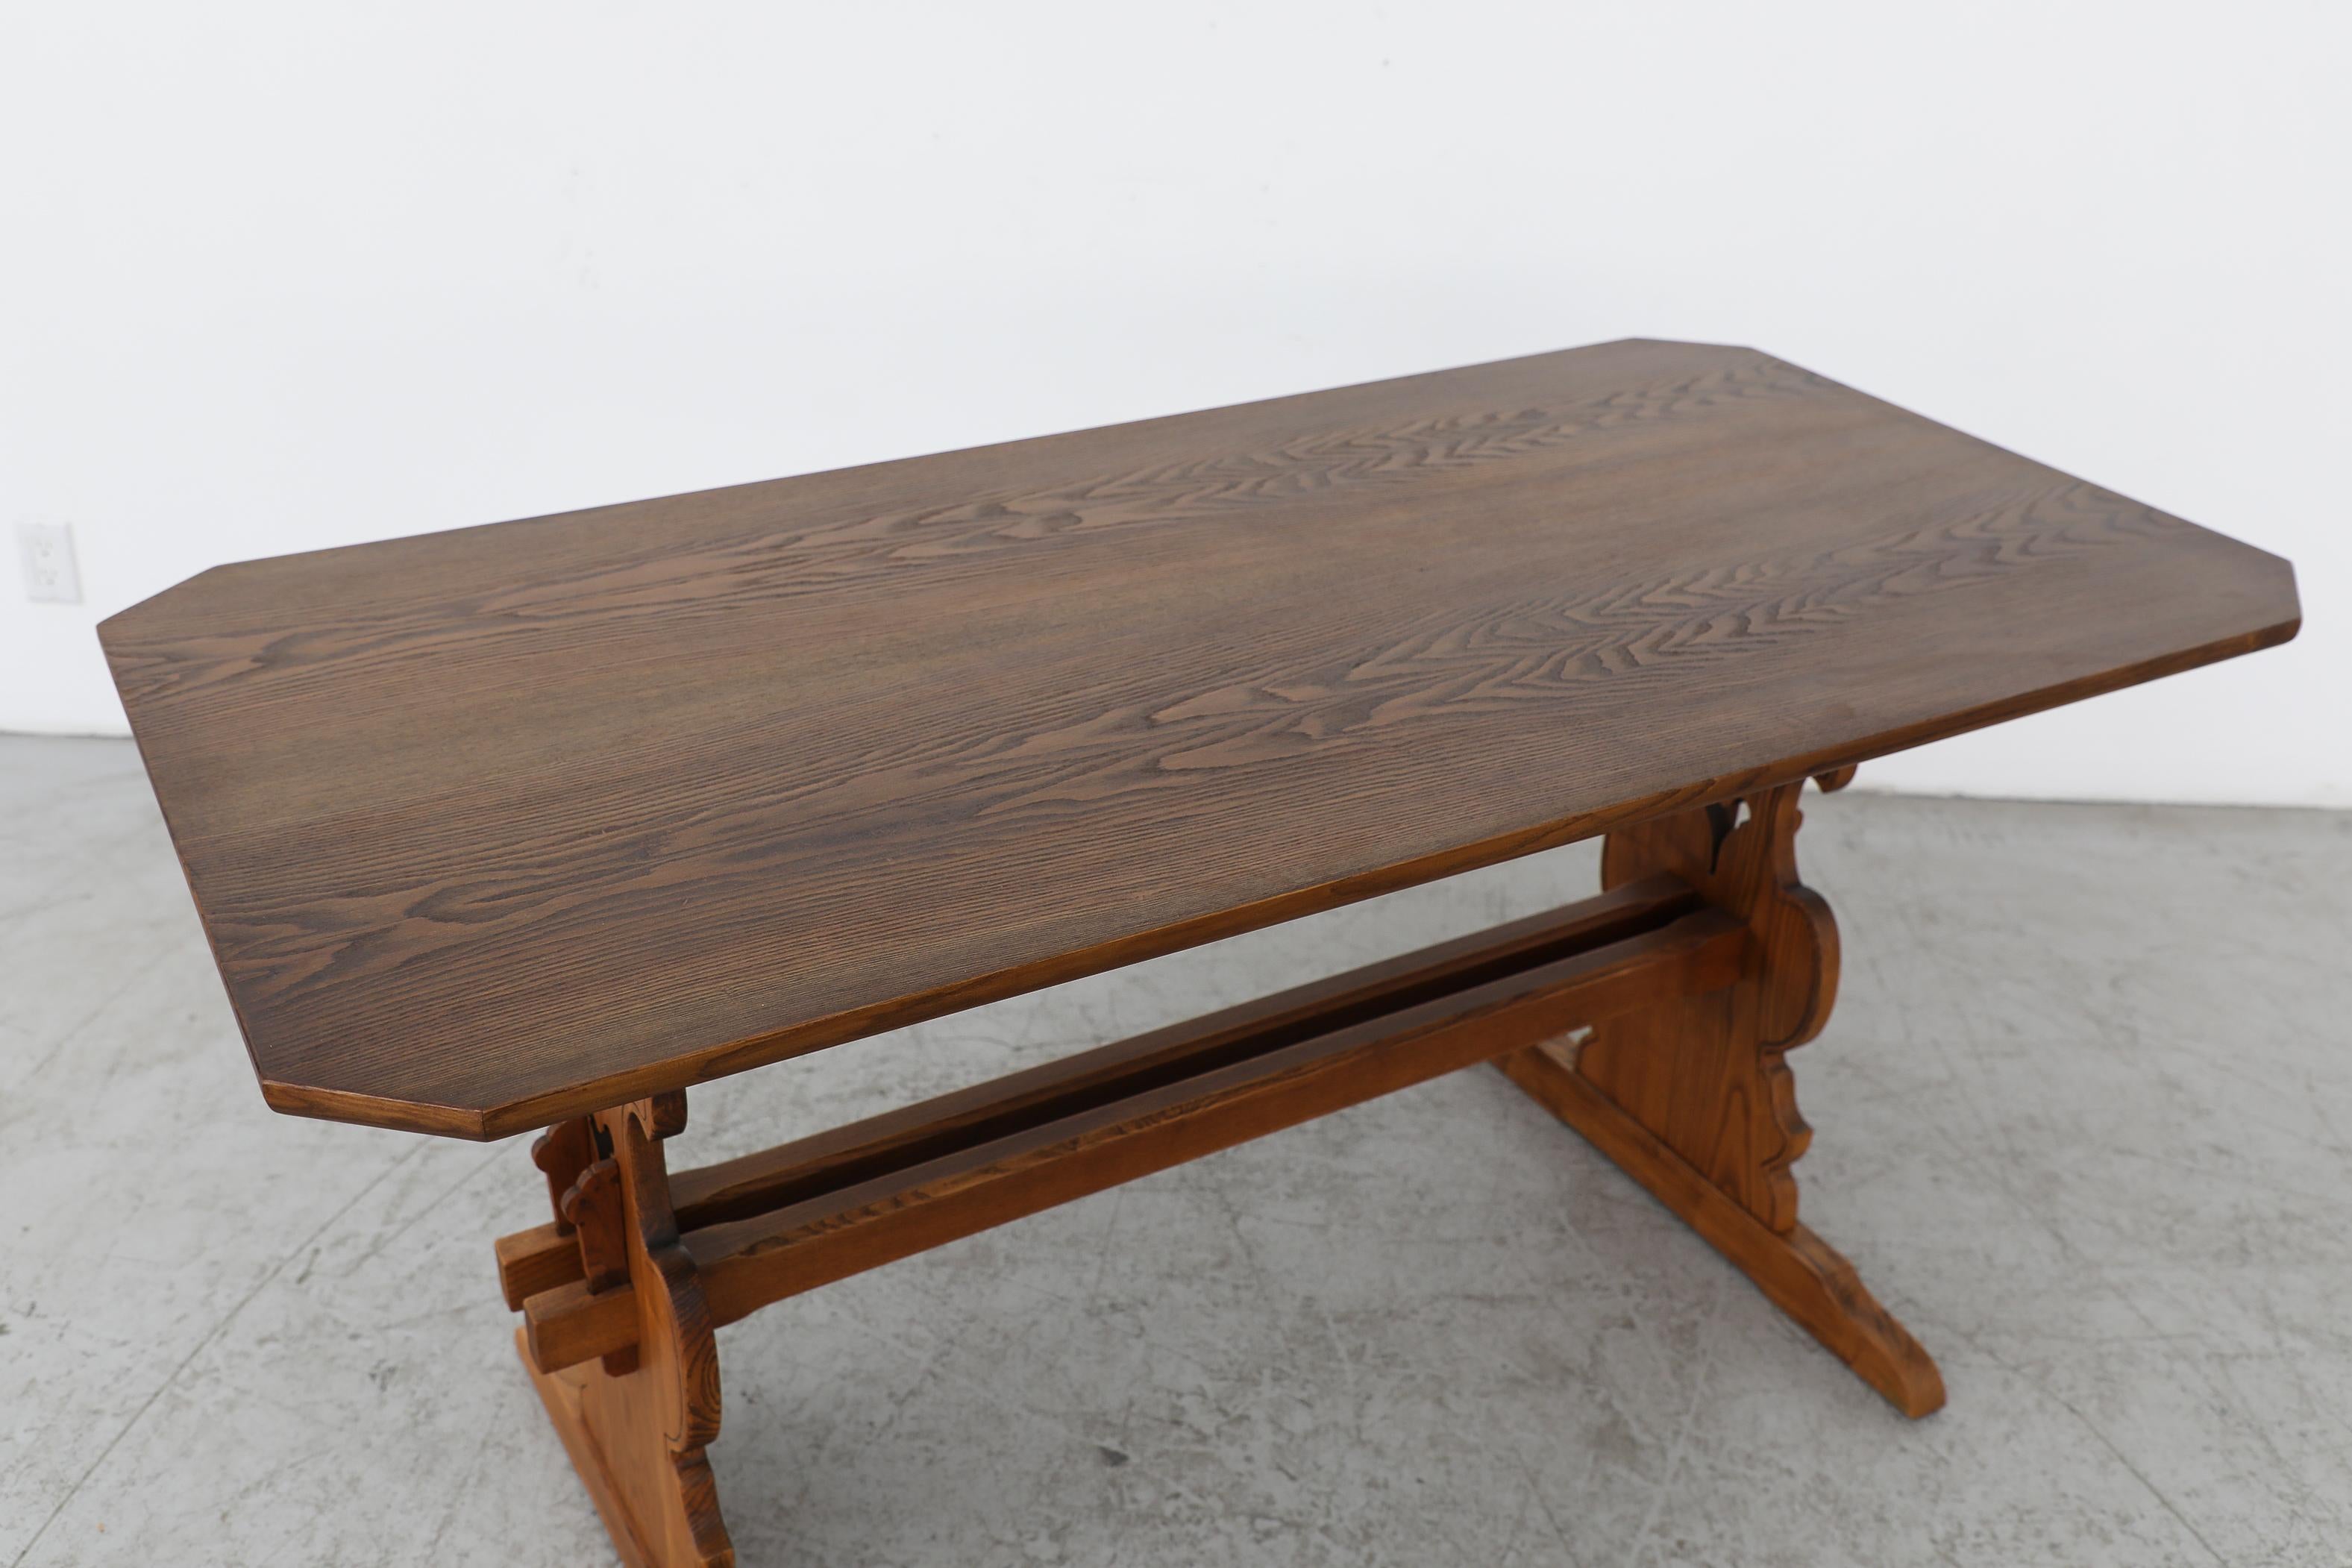 Austrian Ornate Brutalist Tyrolean Style Dark Pine Table with Angled Corners 1